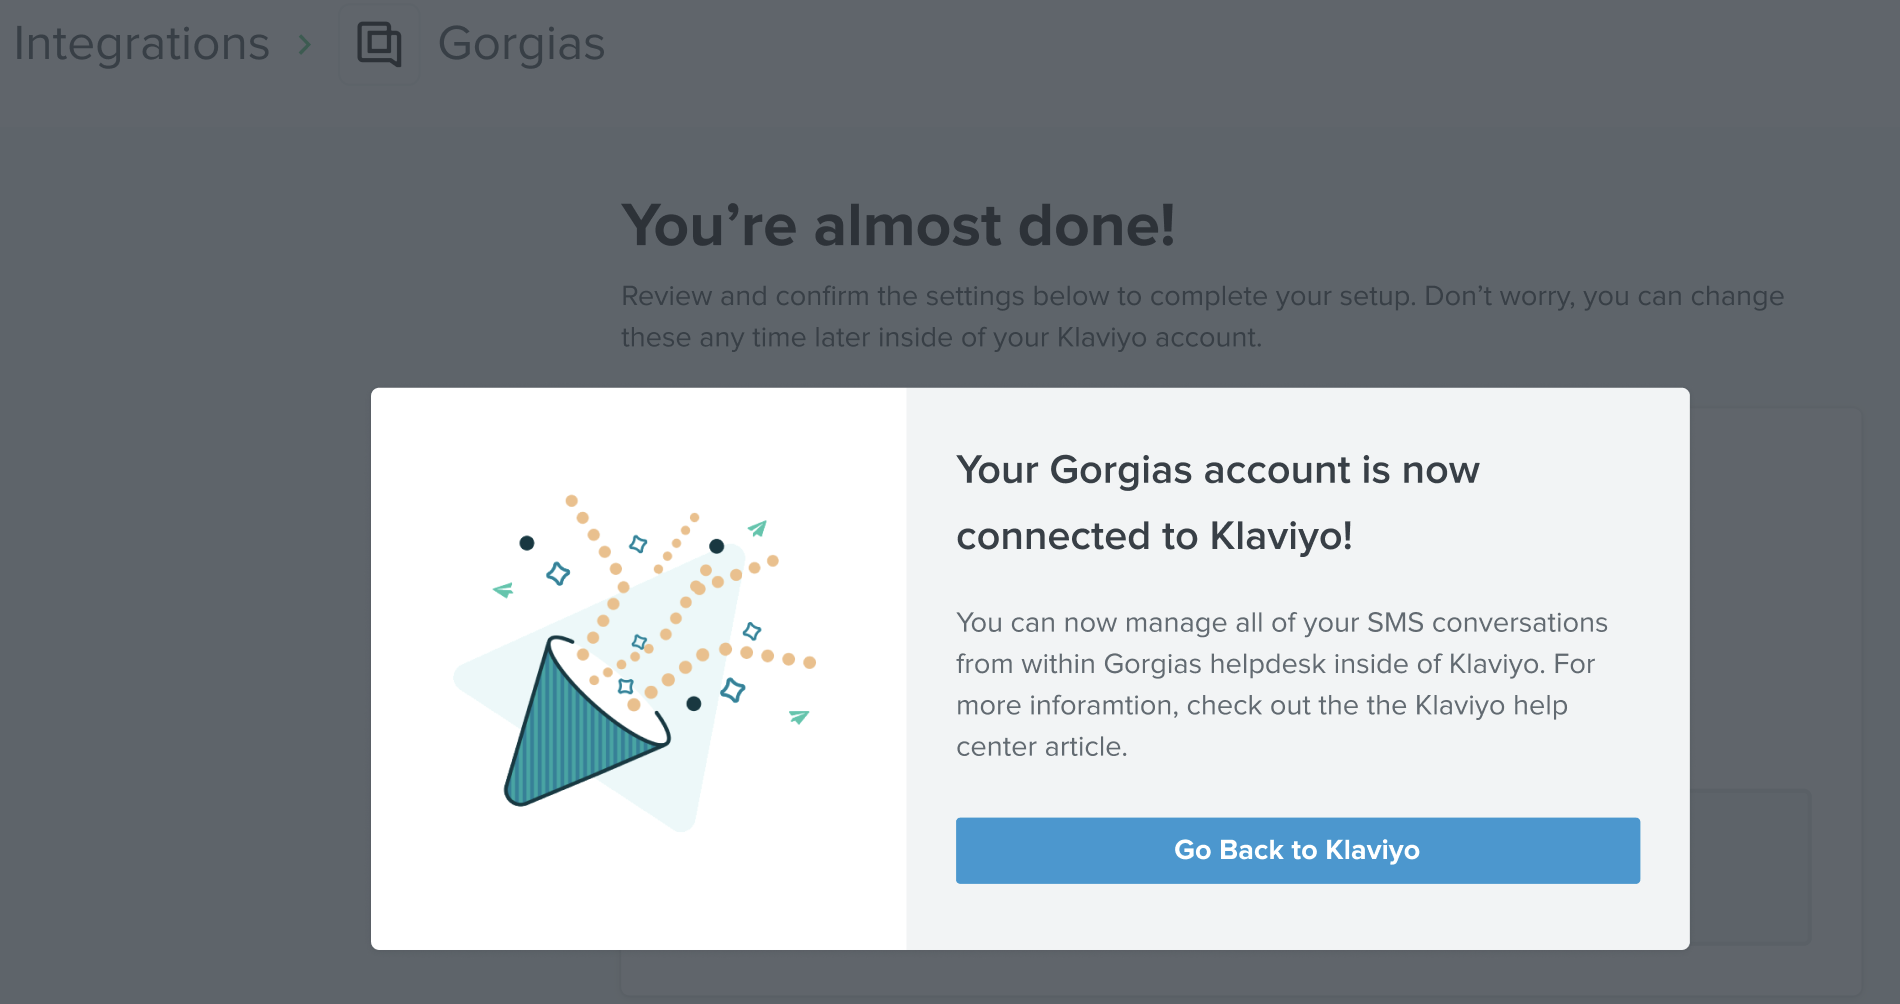 Gorgias integration confirmation screen, with button to go back to Klaviyo at the bottom of the popup